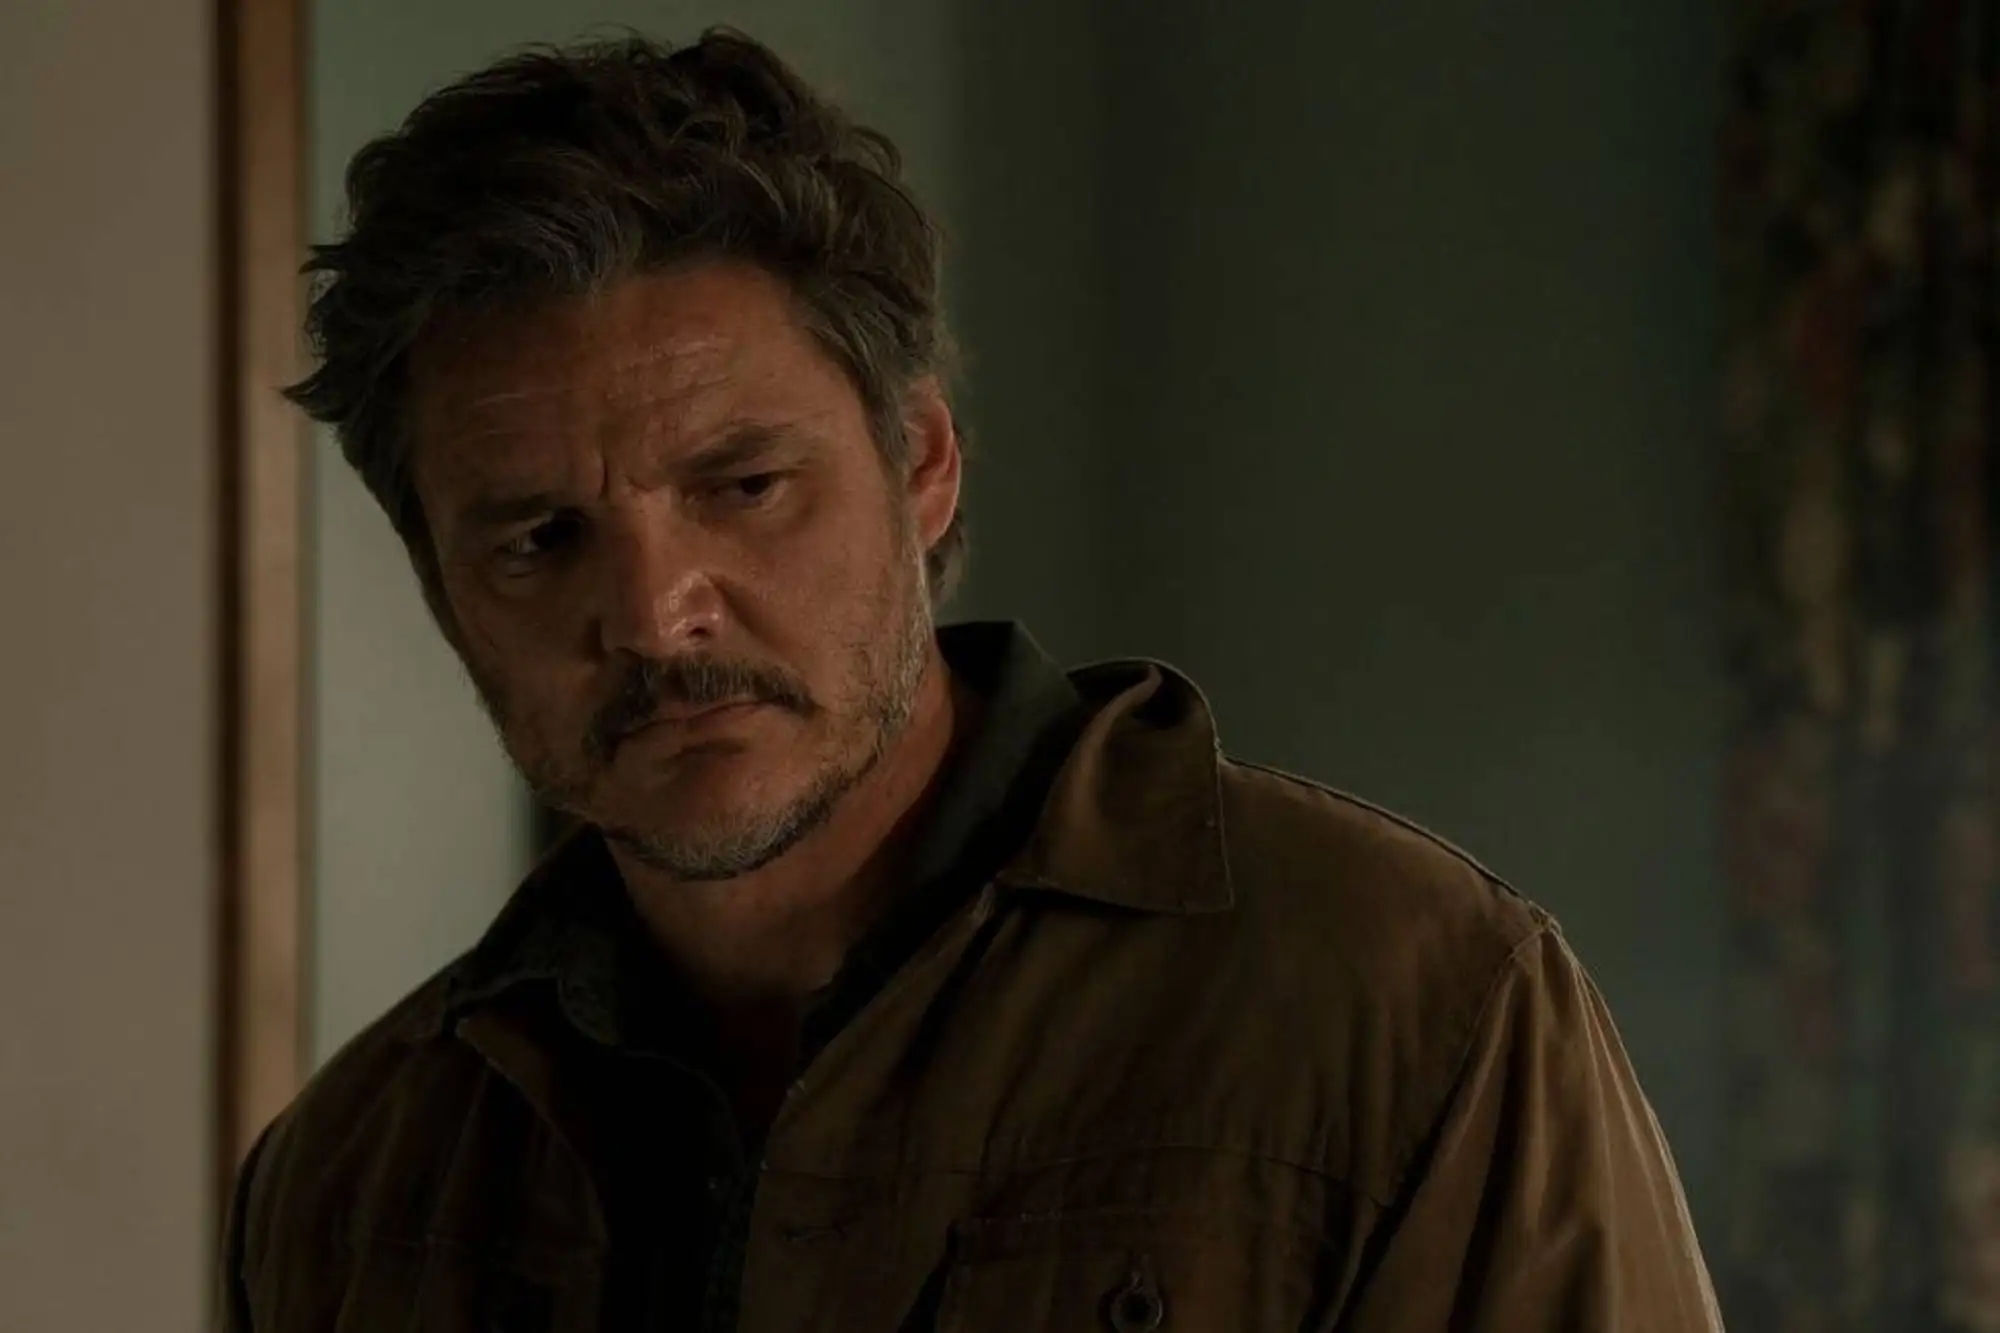 Joel Miller (played by Pedro Pascal) in the third episode of The Last of Us